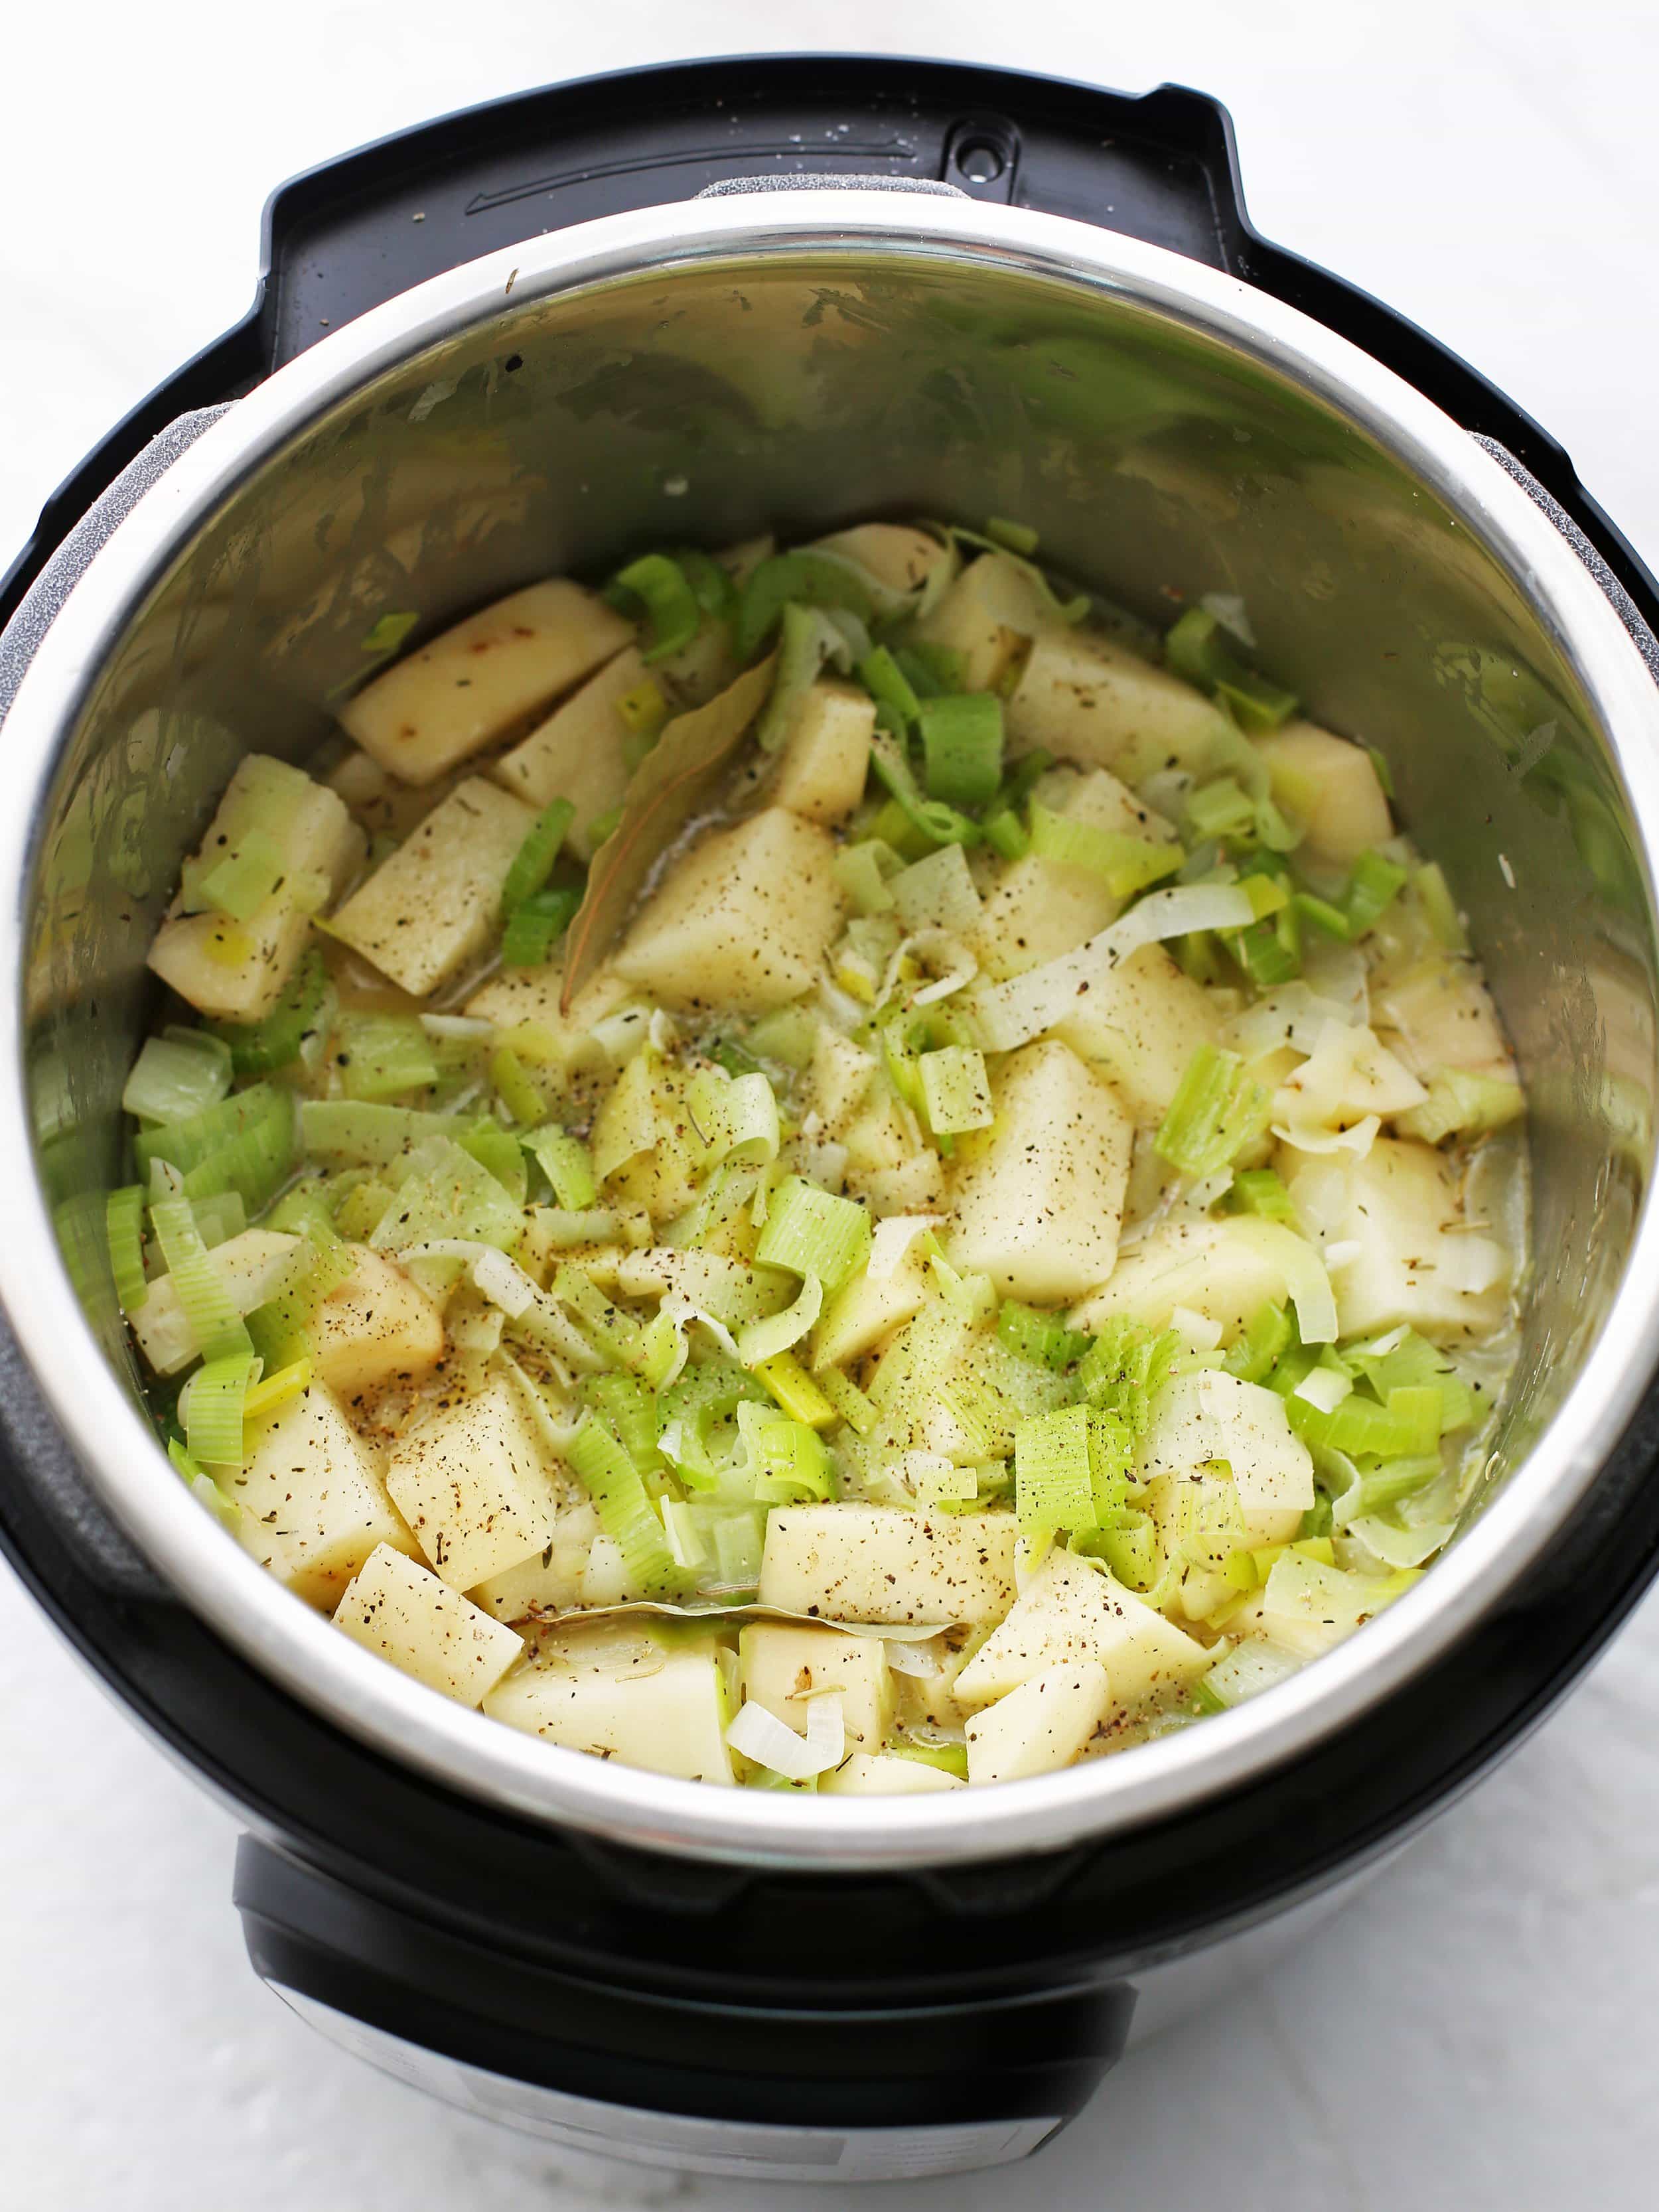 Potato and leek soup ingredients in the Instant Pot.